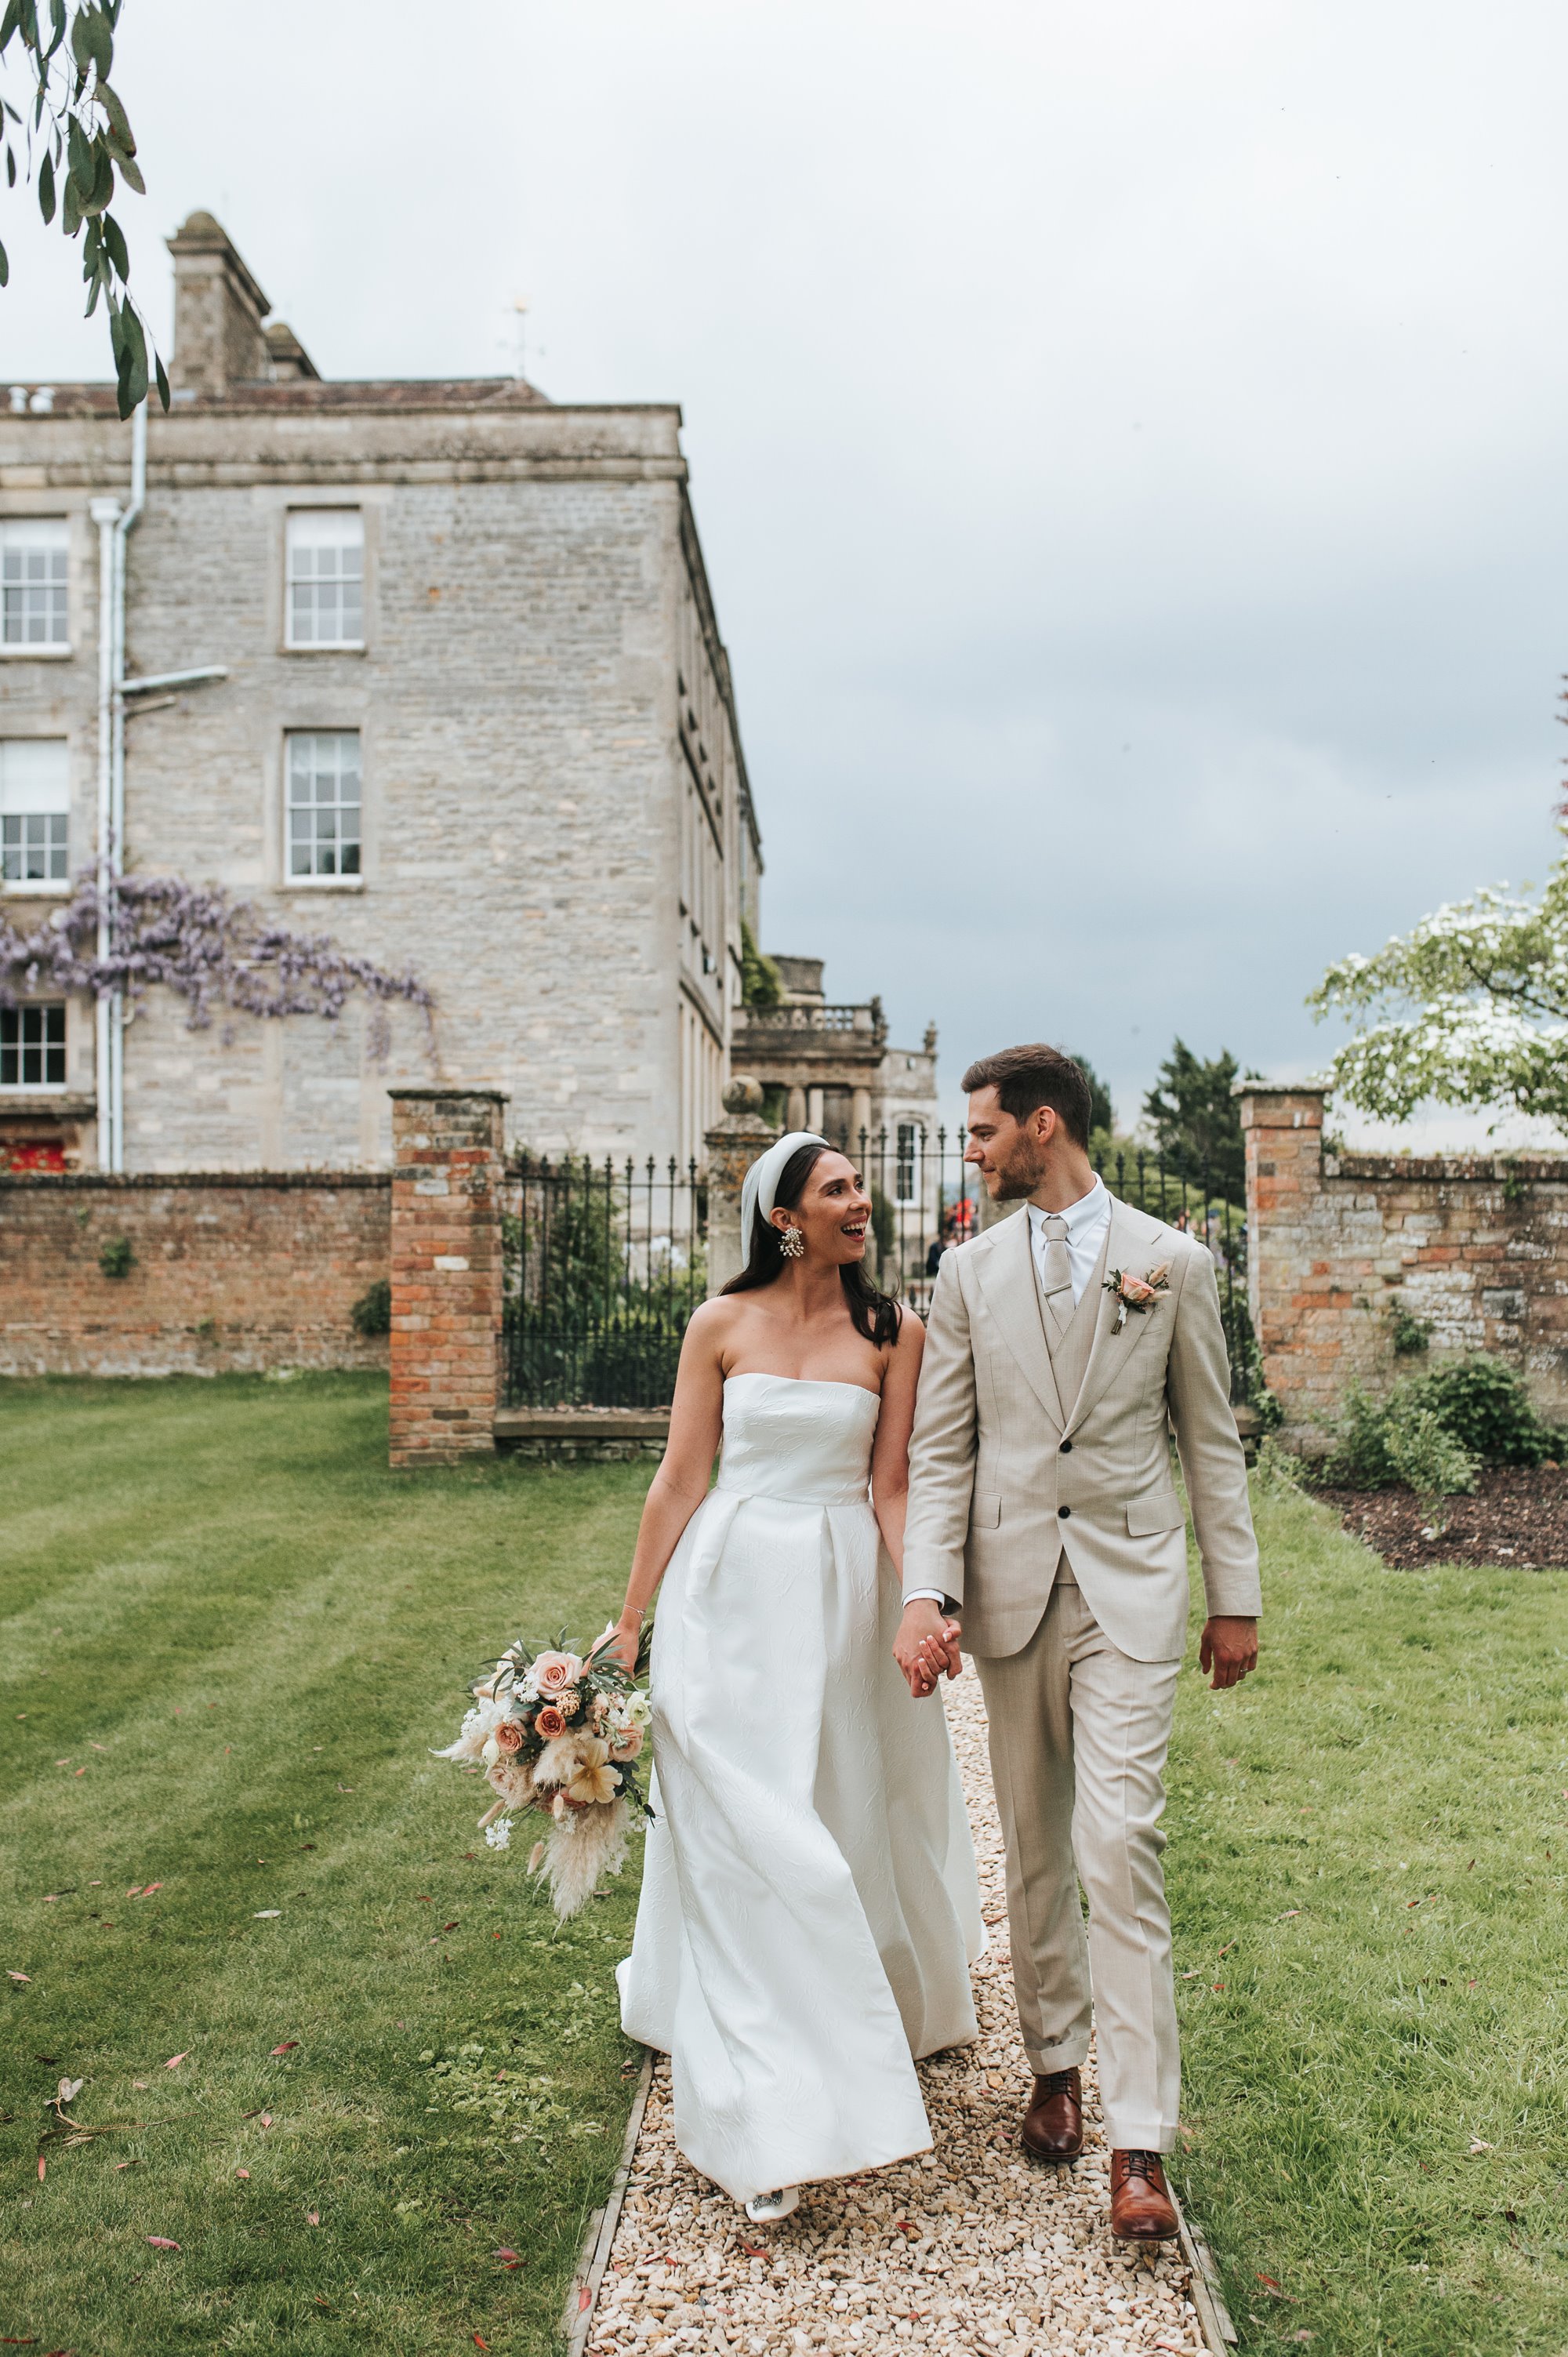 Bride and groom walking through a lovely walled garden of a stately home and wedding venue in the cotswolds